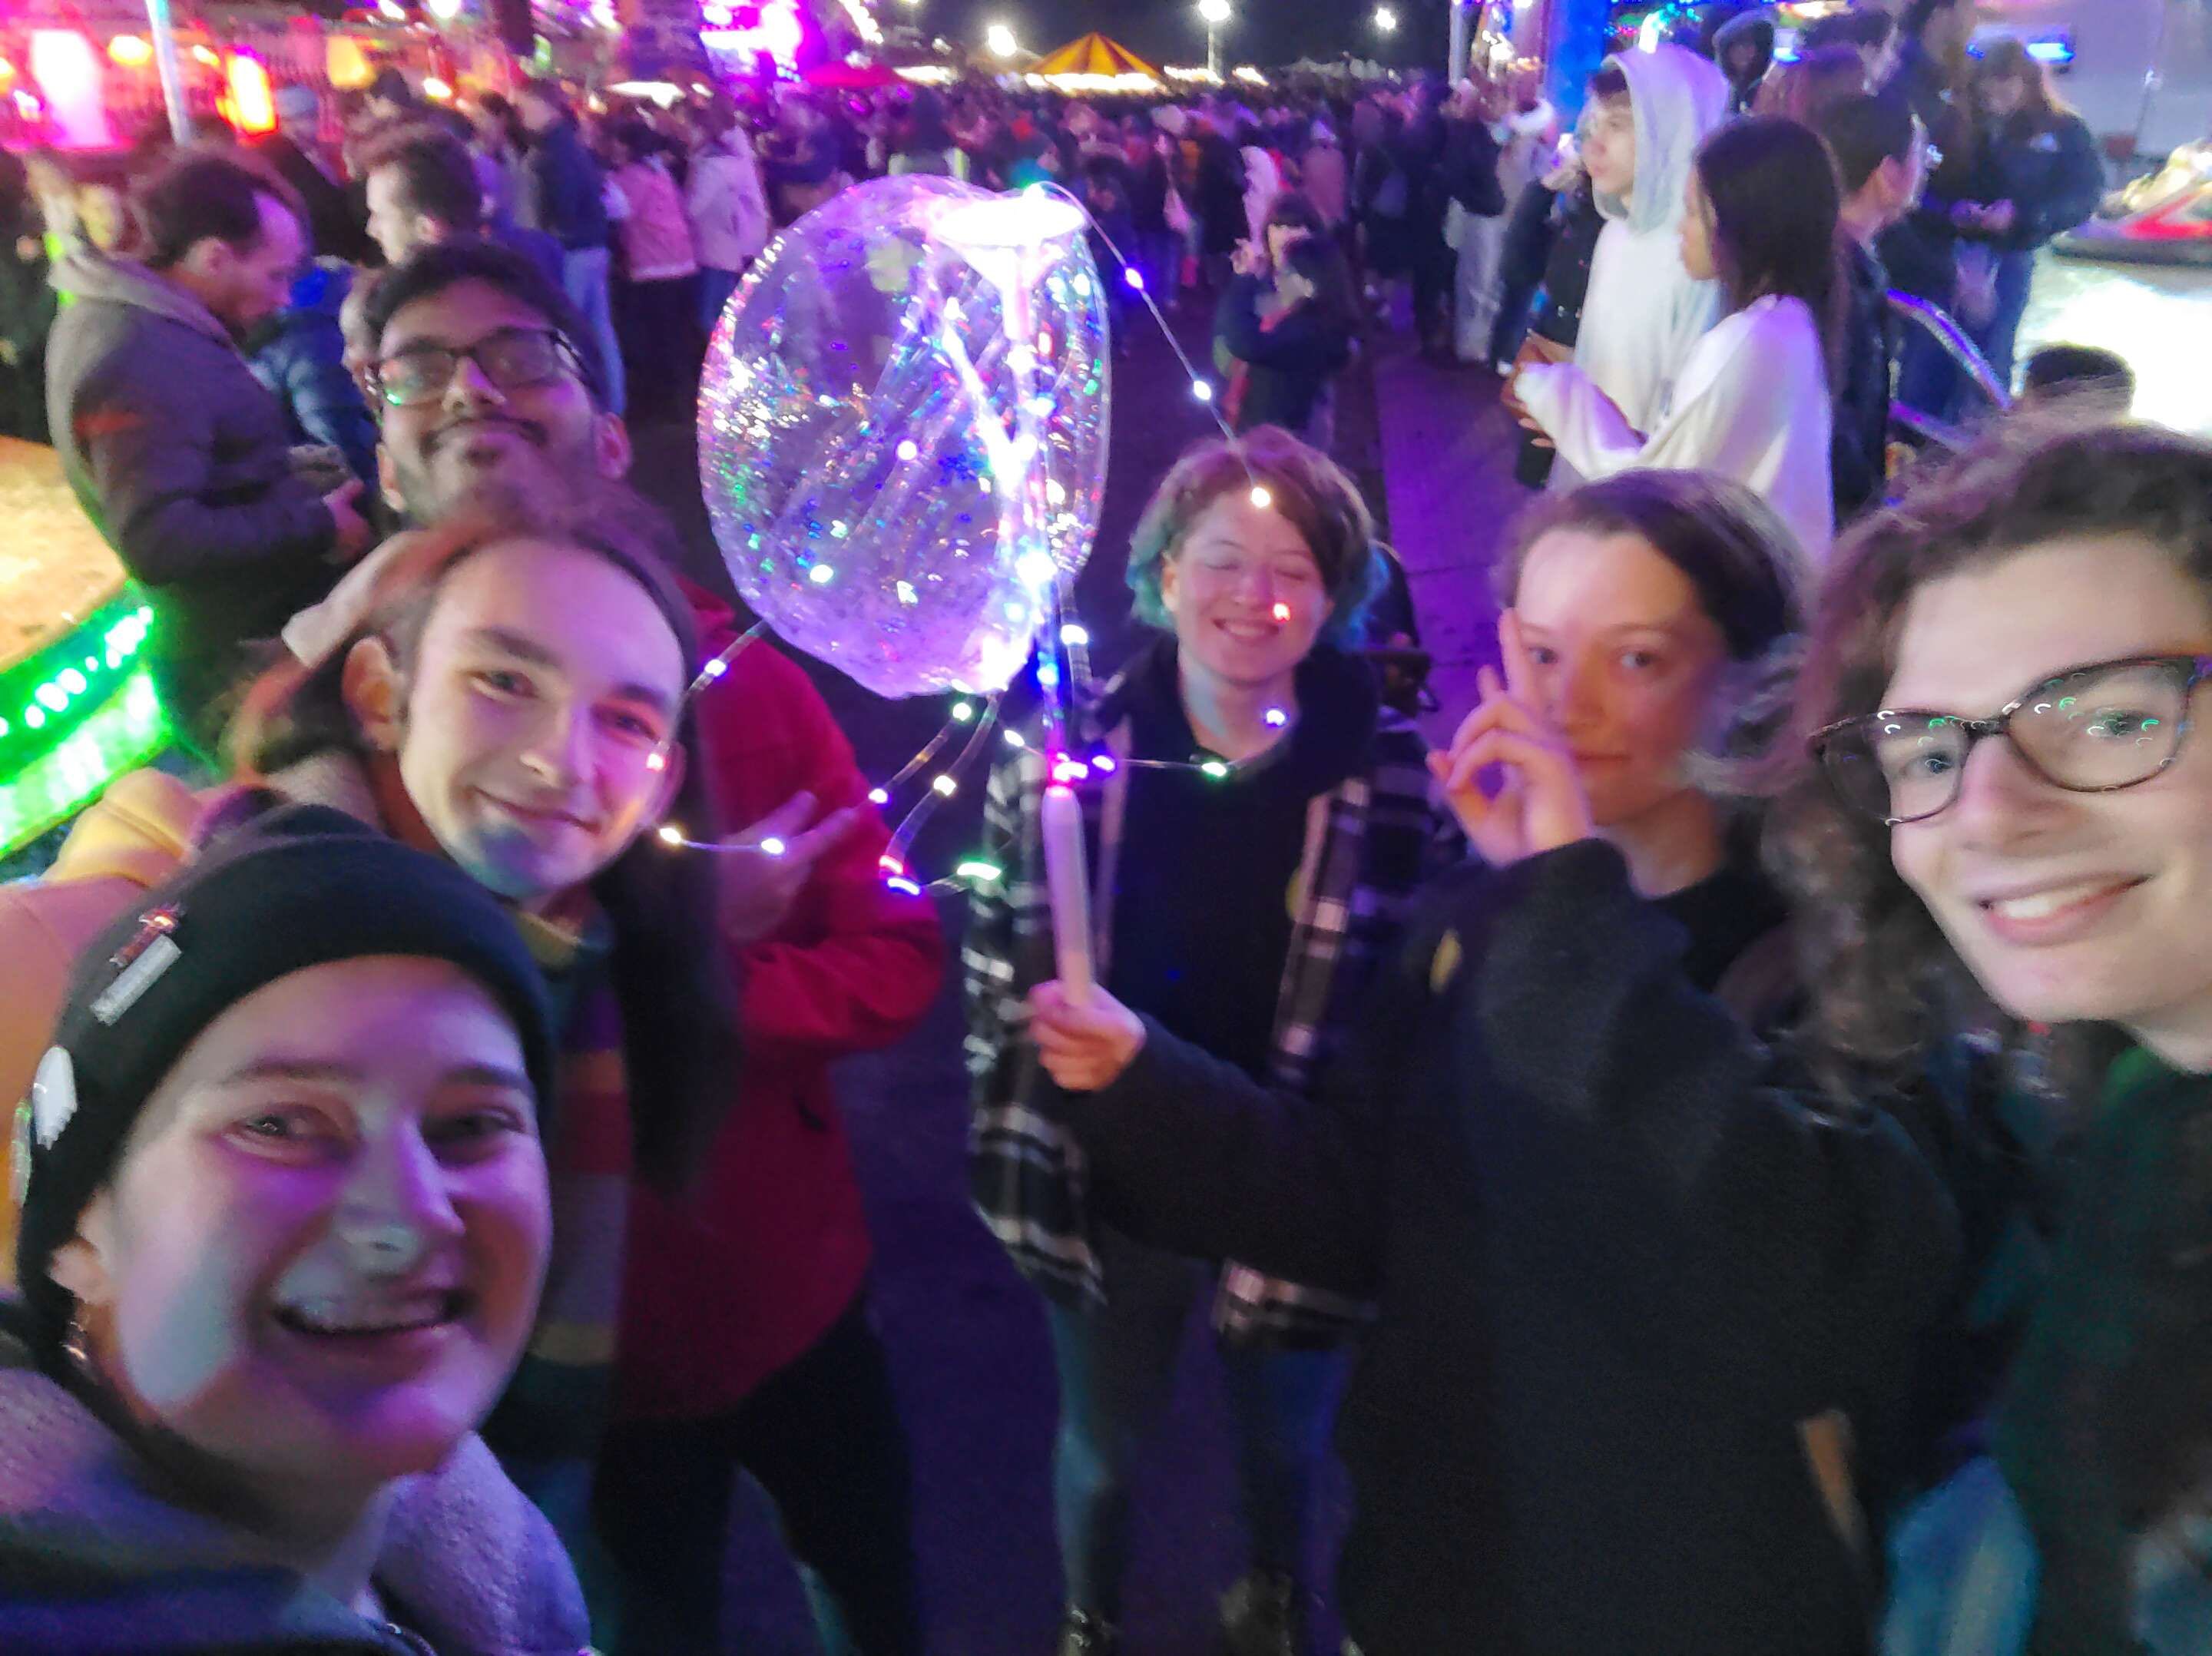 A group of people standing around a deflated clear balloon with fairy lights on it